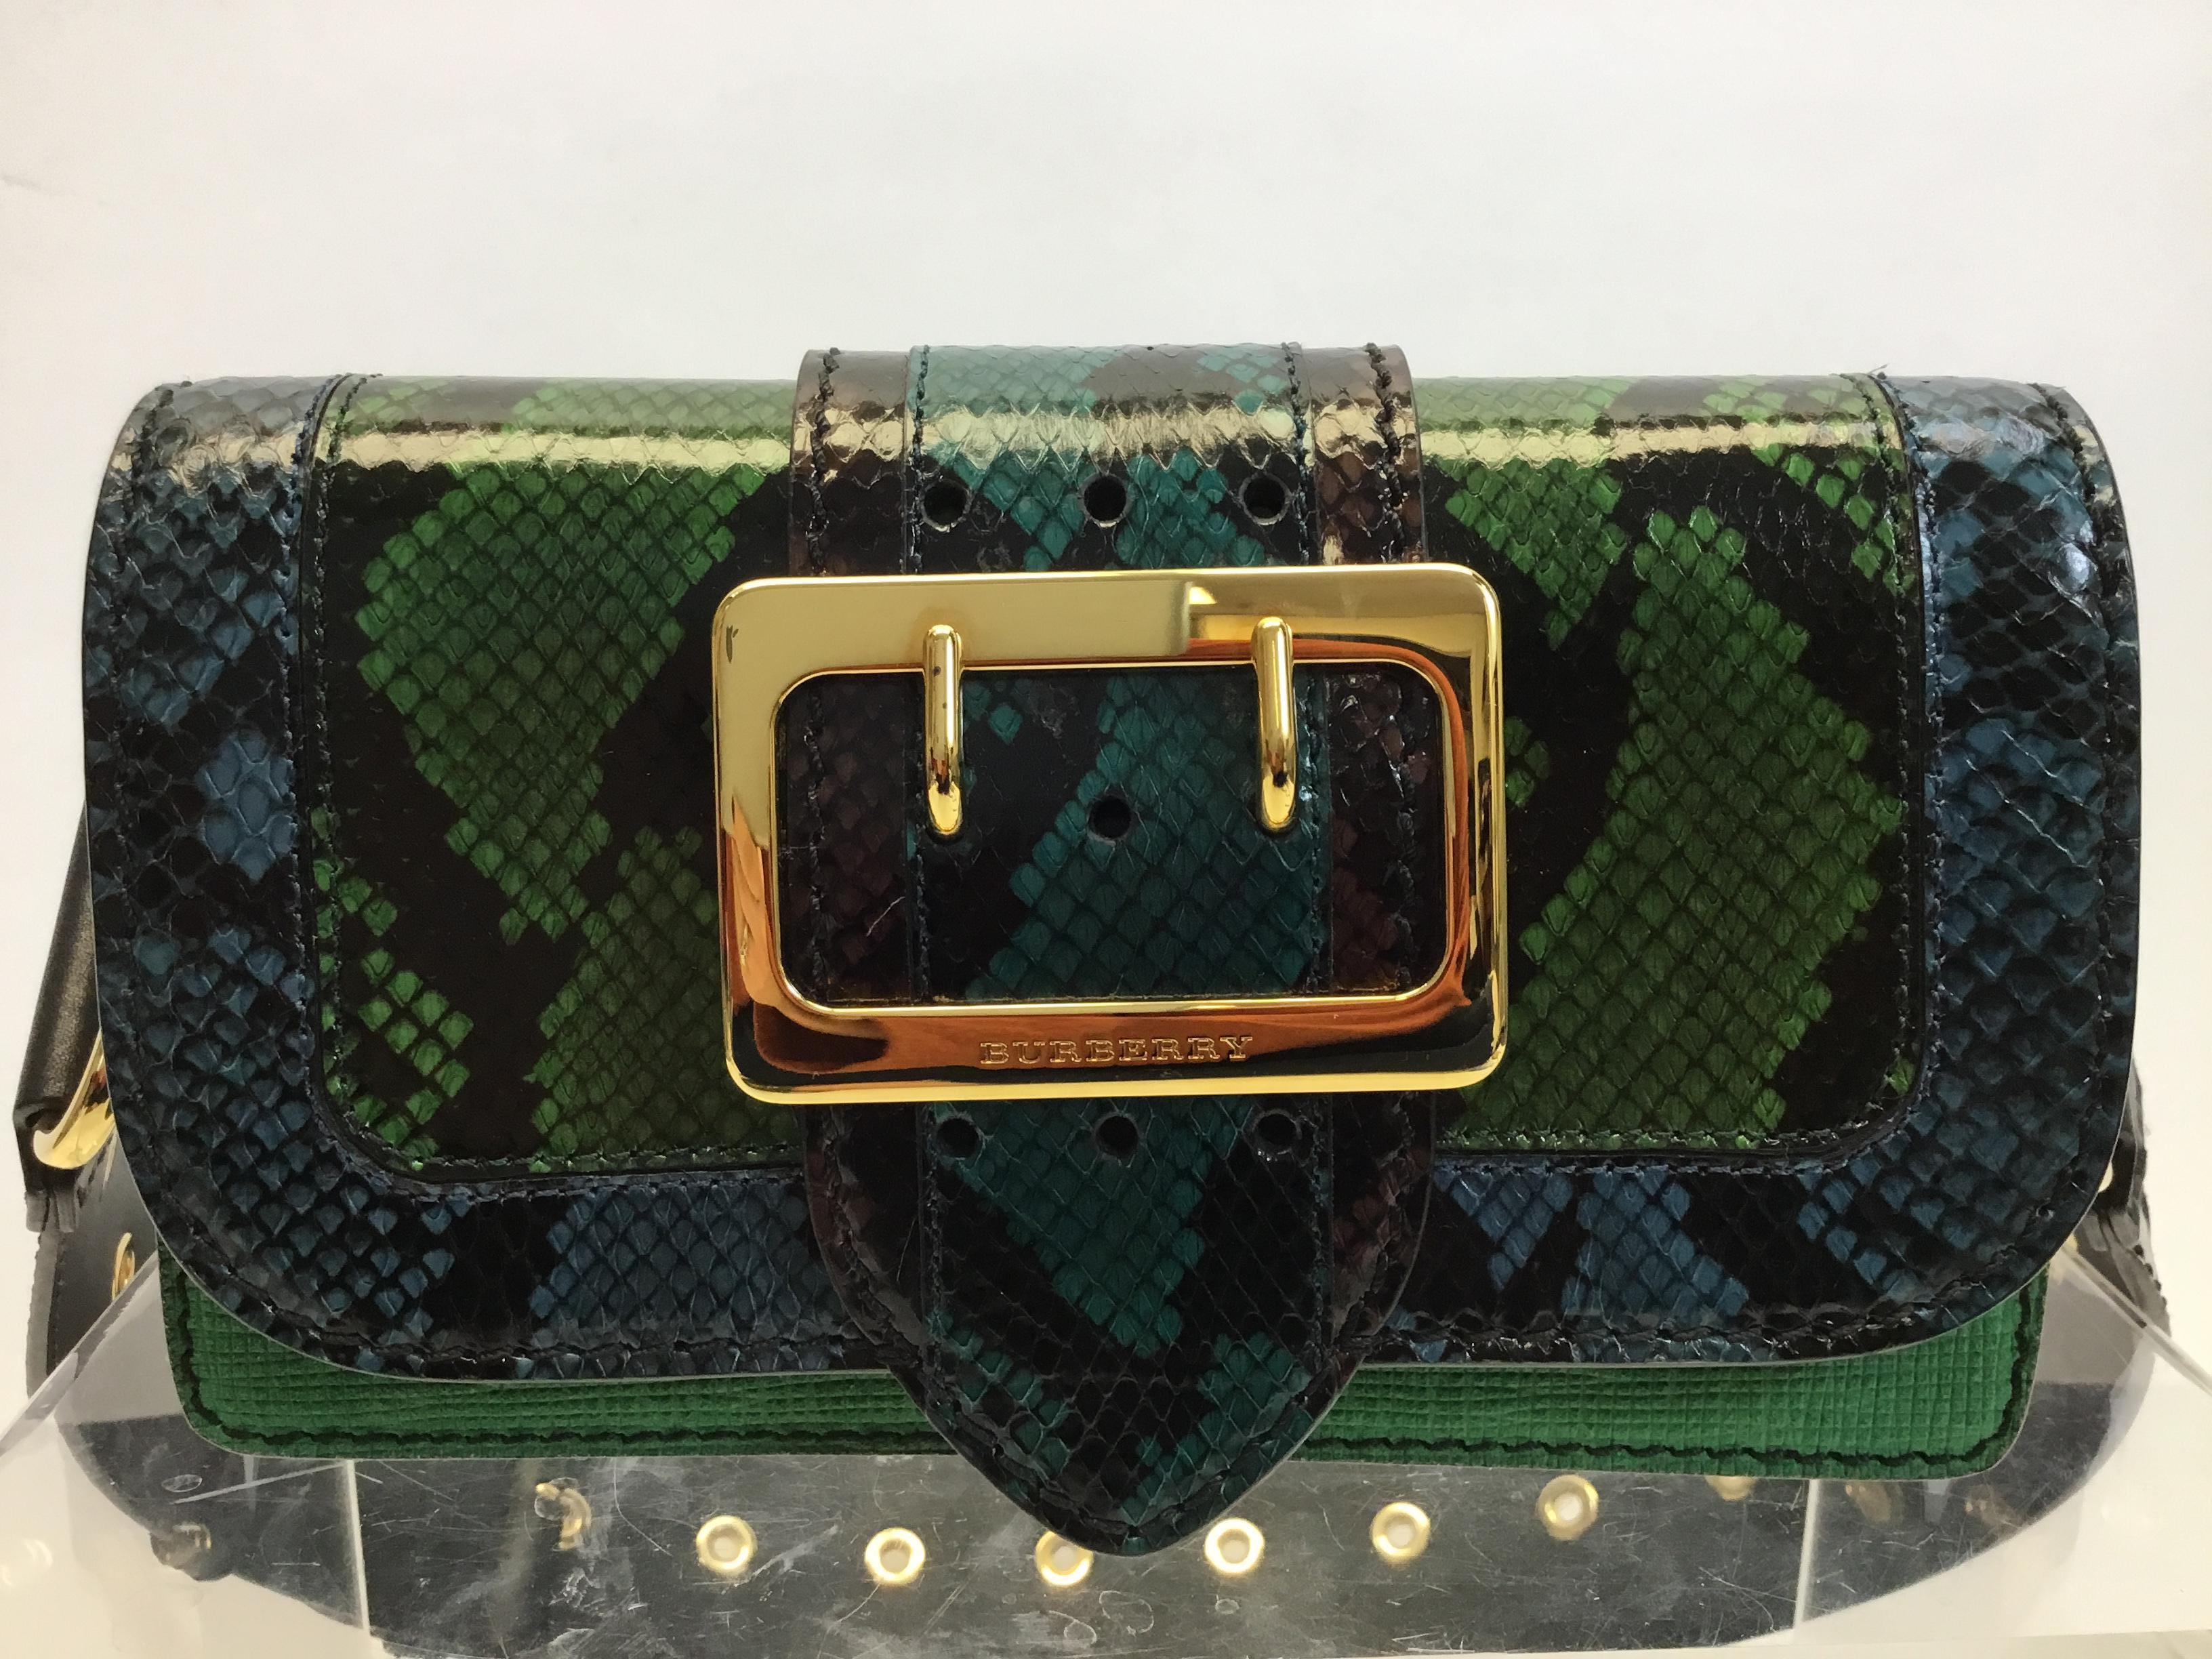 Burberry Limited Edition Snakeskin Bag with Two Straps NWT
$1799
Snakeskin
Leather interior
7.5” x 4.5” x 2.5”